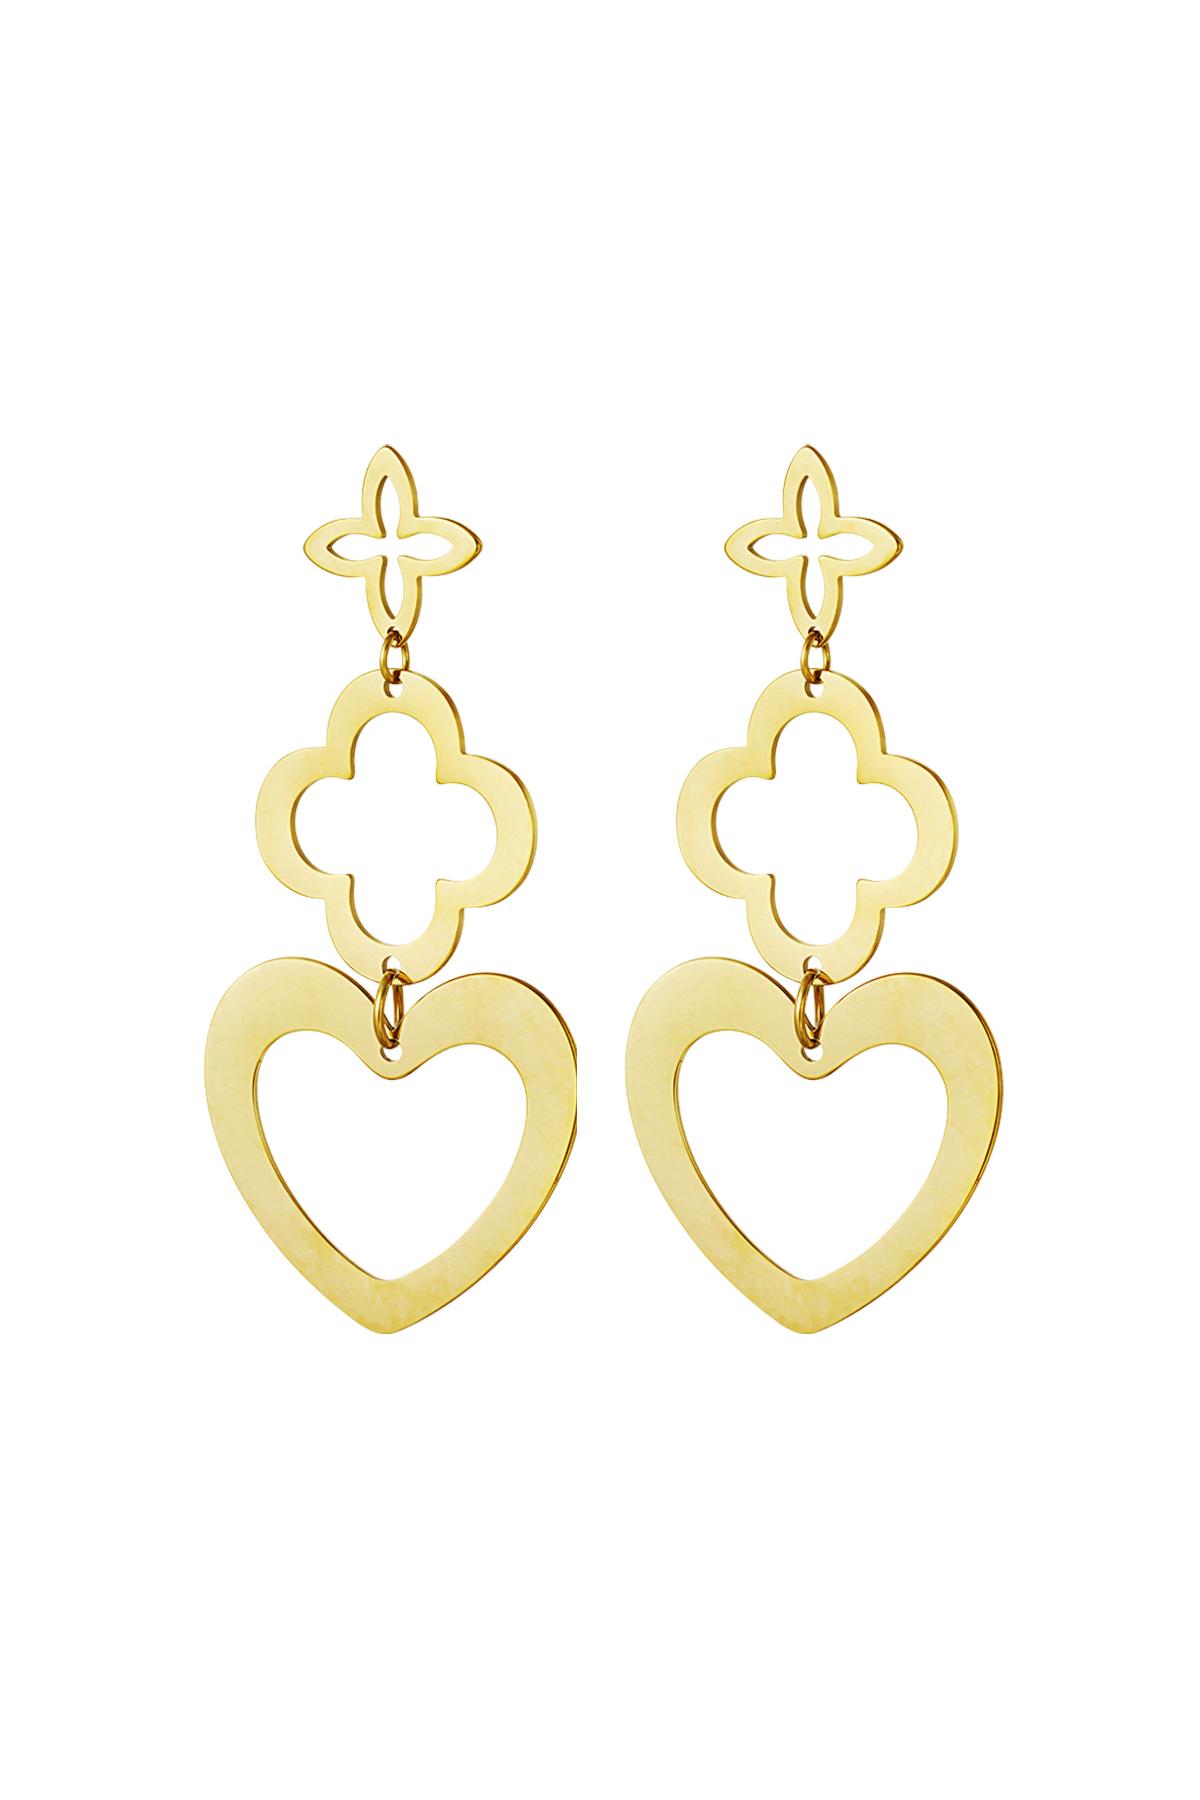 Statement earrings three charms Gold Stainless Steel